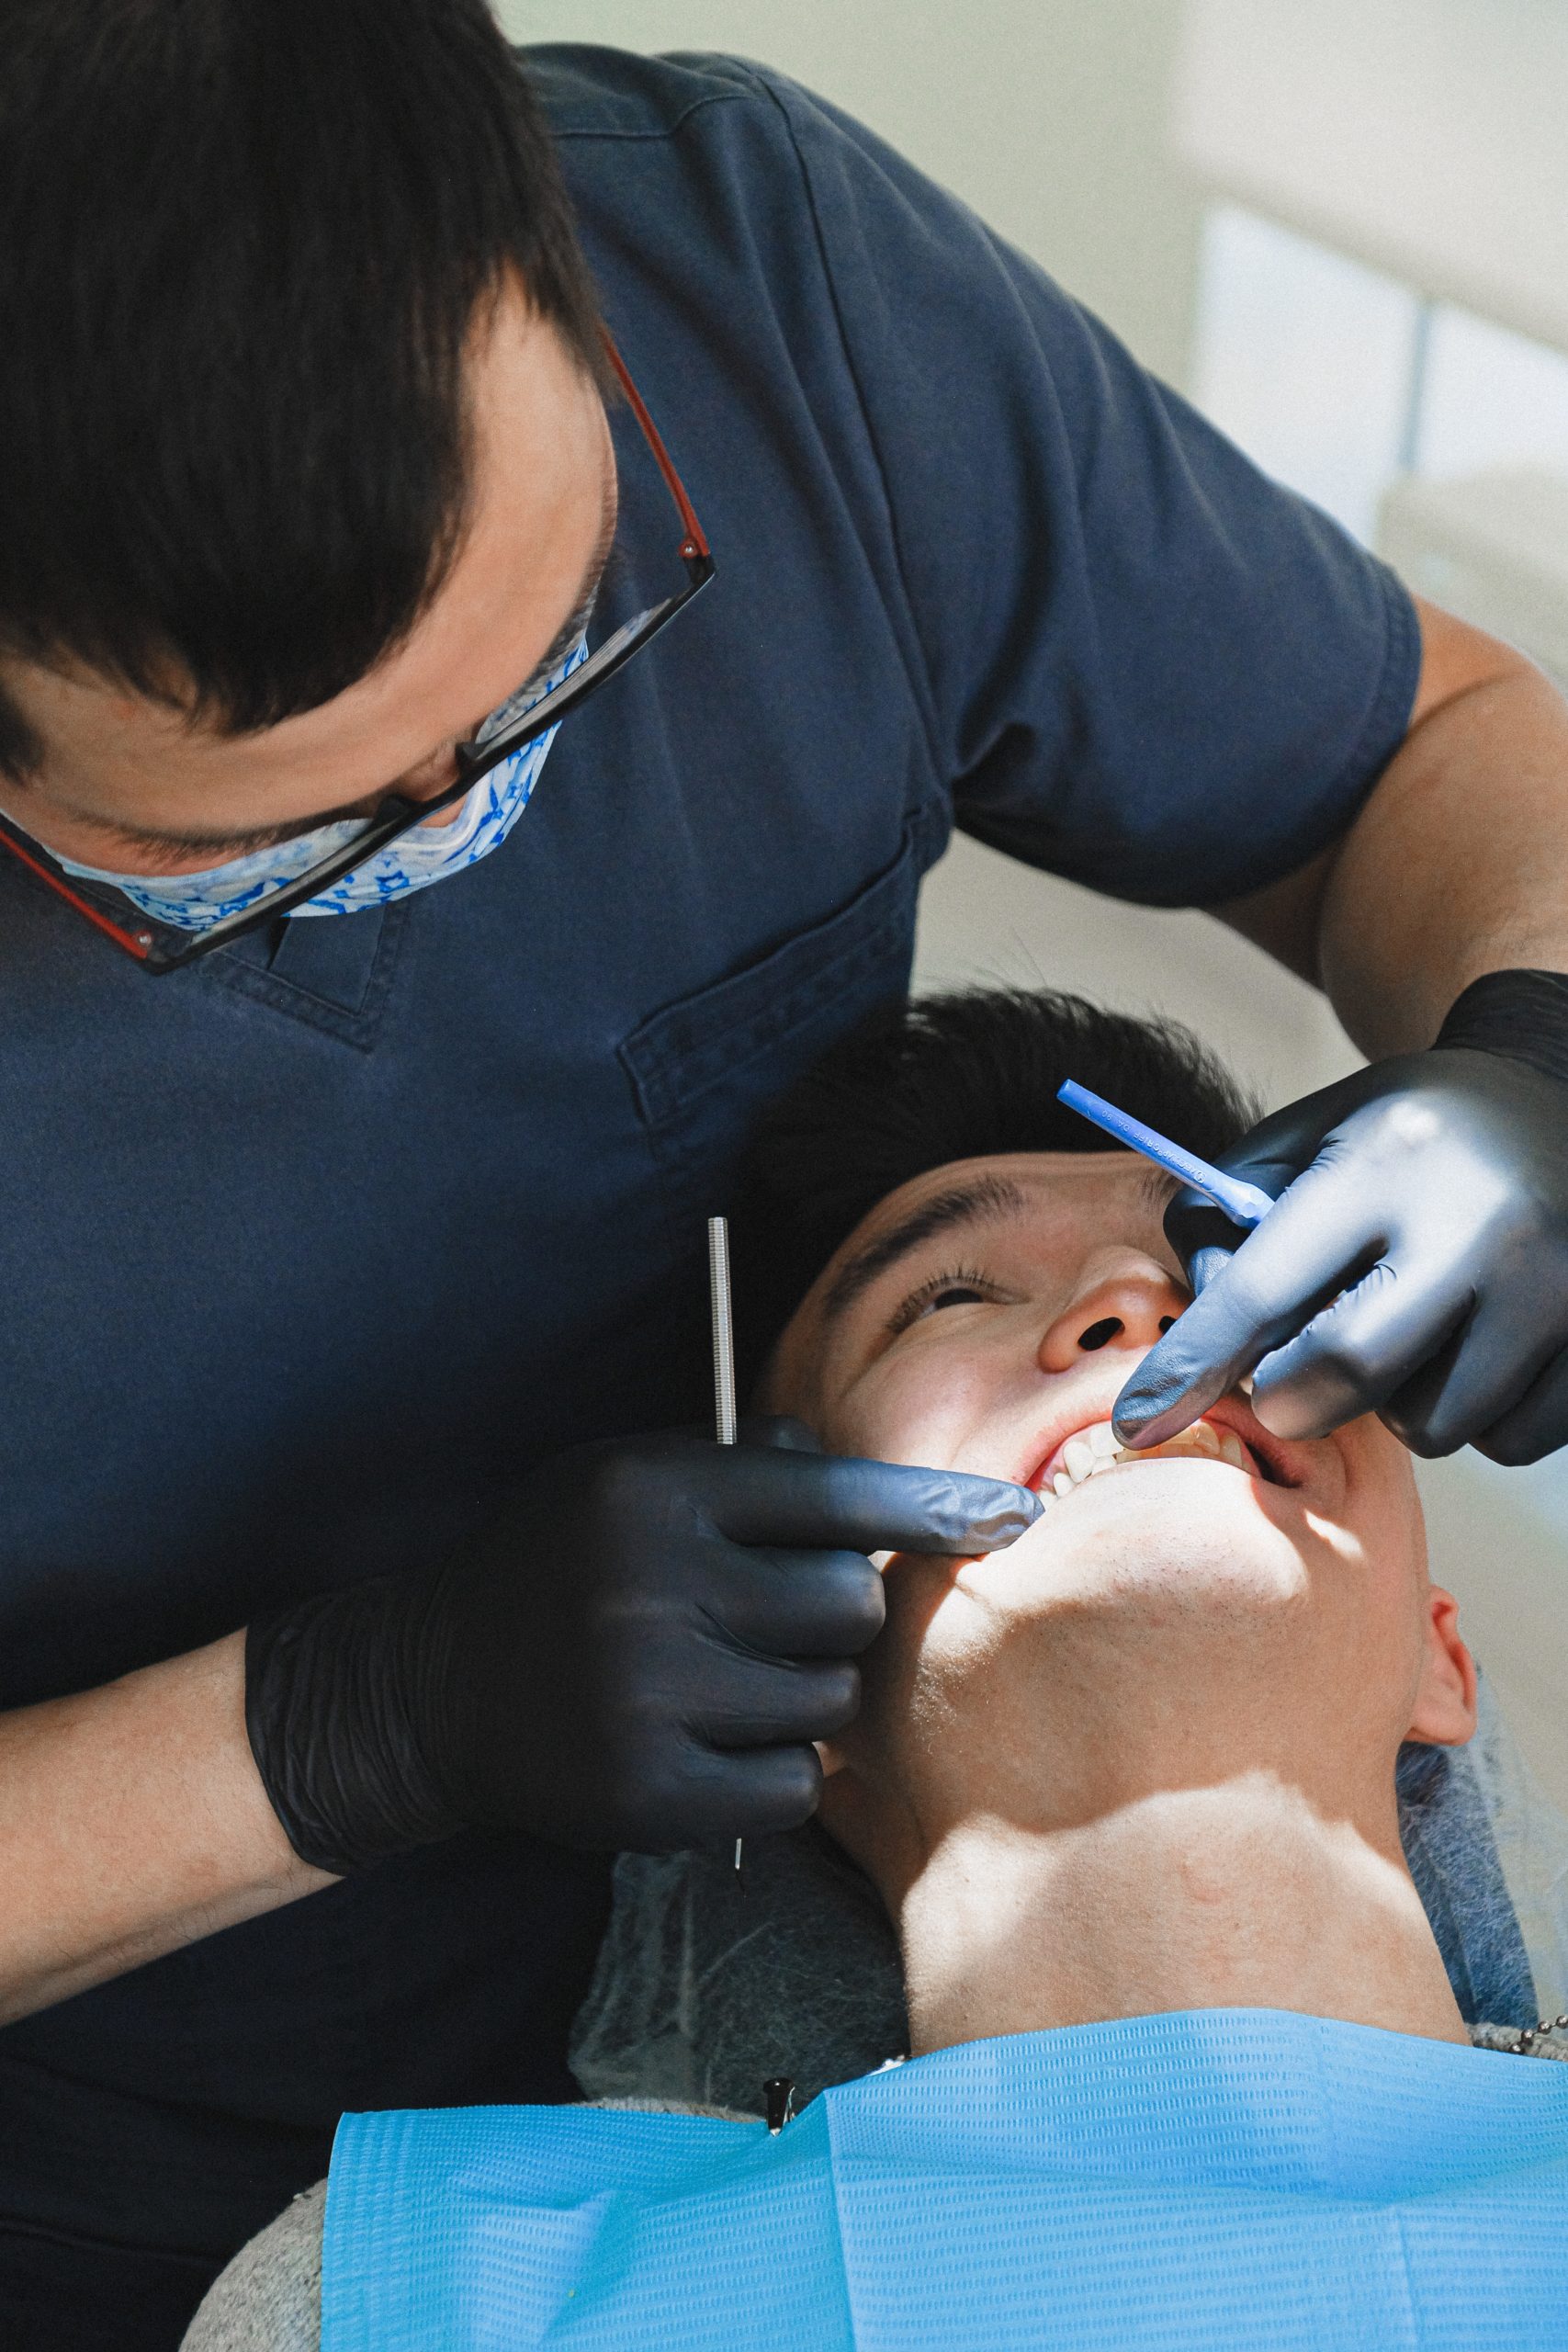 A man getting fitted for a dental crown